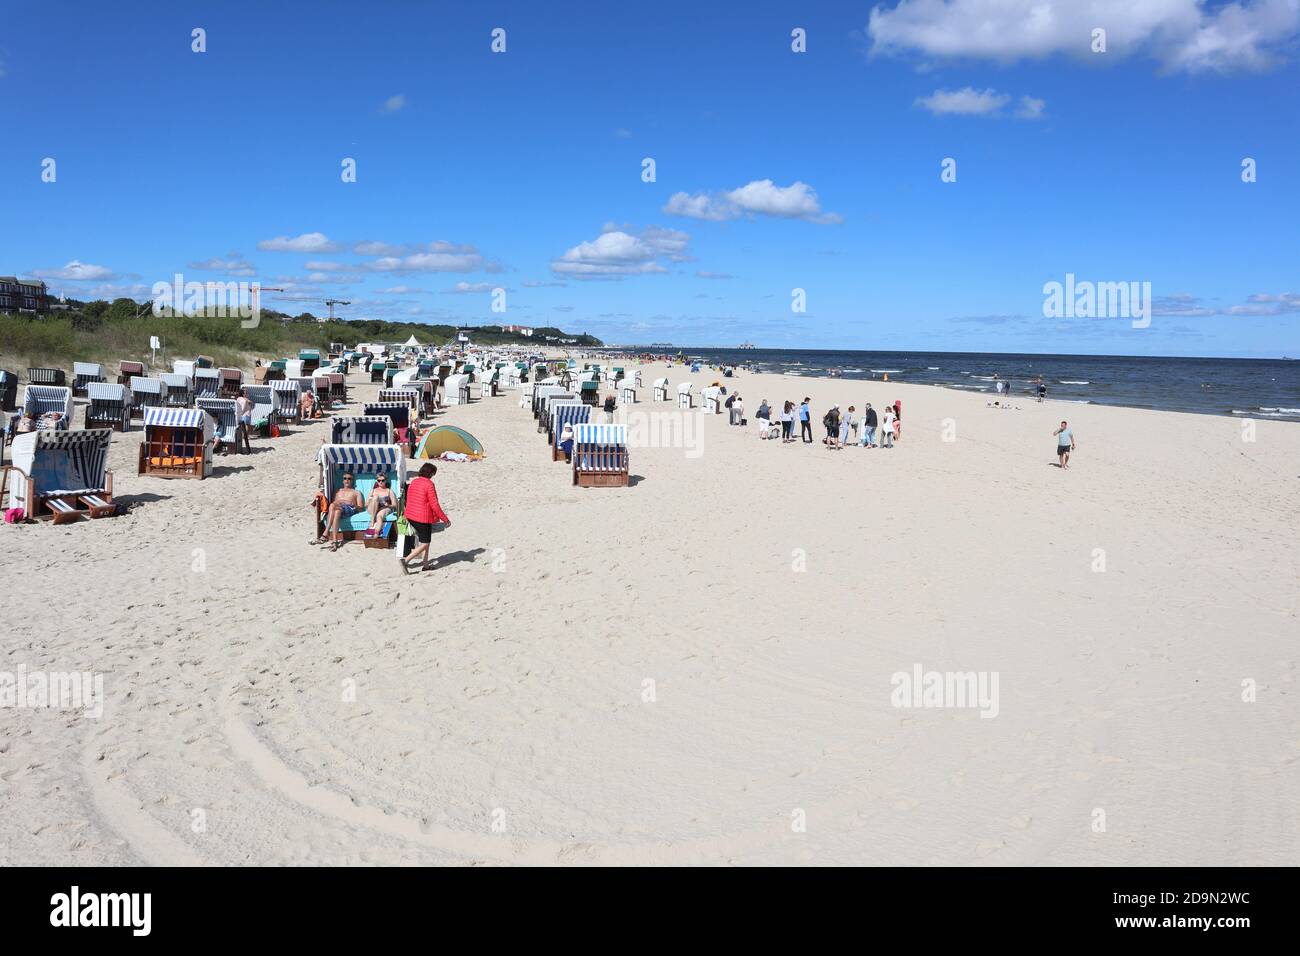 Heringsdorf-Ahlbeck, Mecklenburg-Vorpommern/ Germany - August 25 2020: At the beach at the Baltic sea in Northern Germany Stock Photo